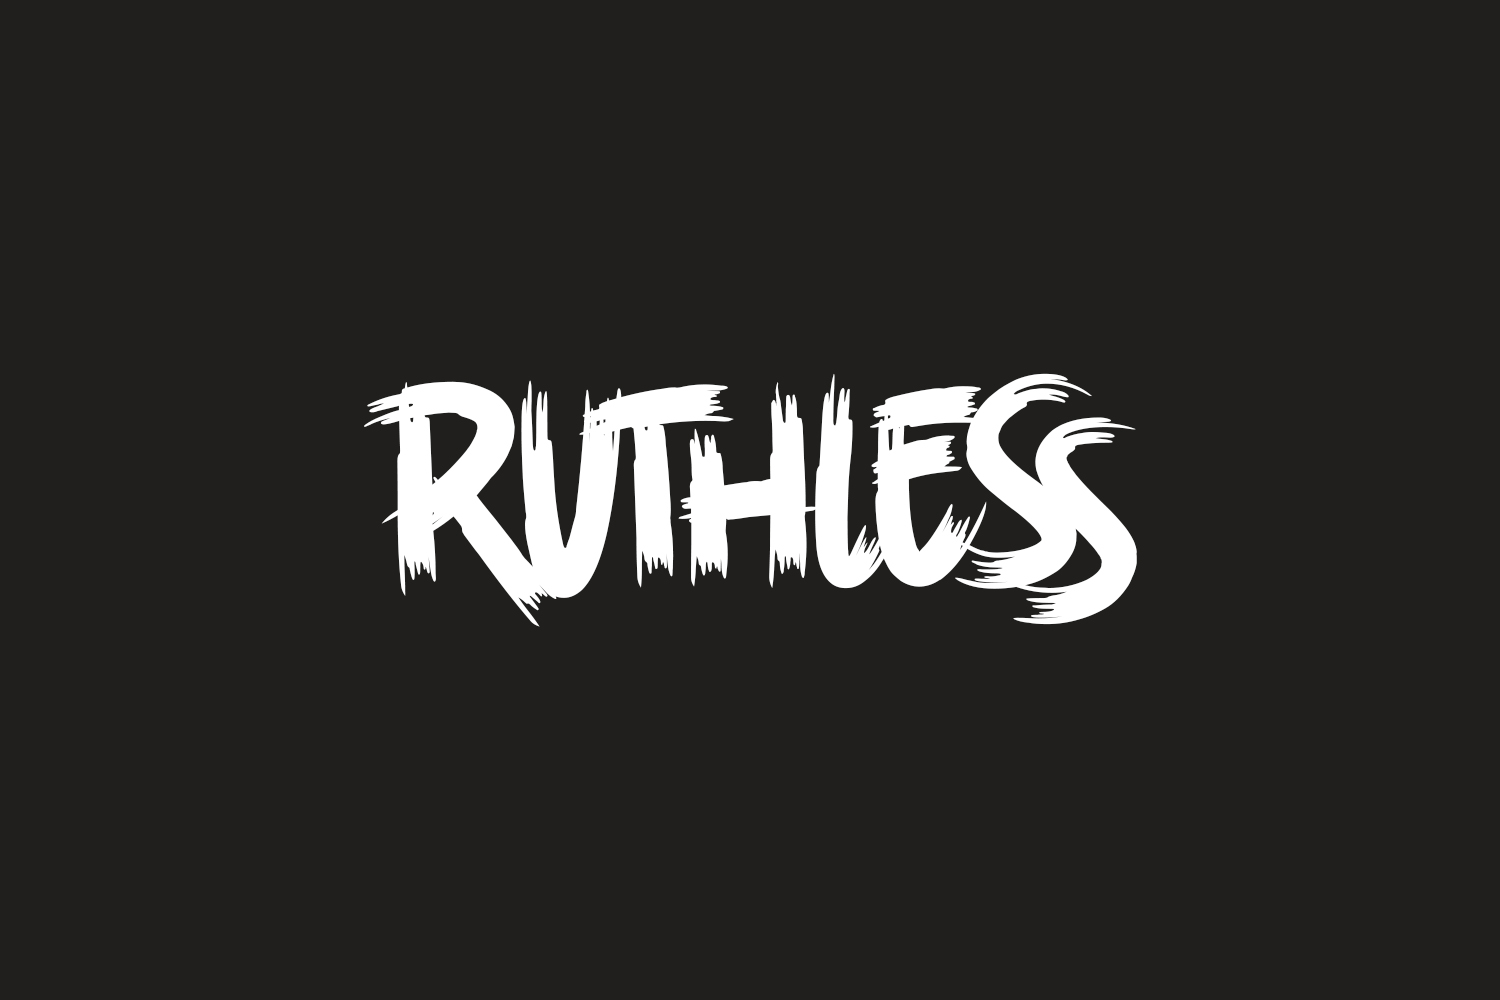 Ruthless | Fonts Shmonts